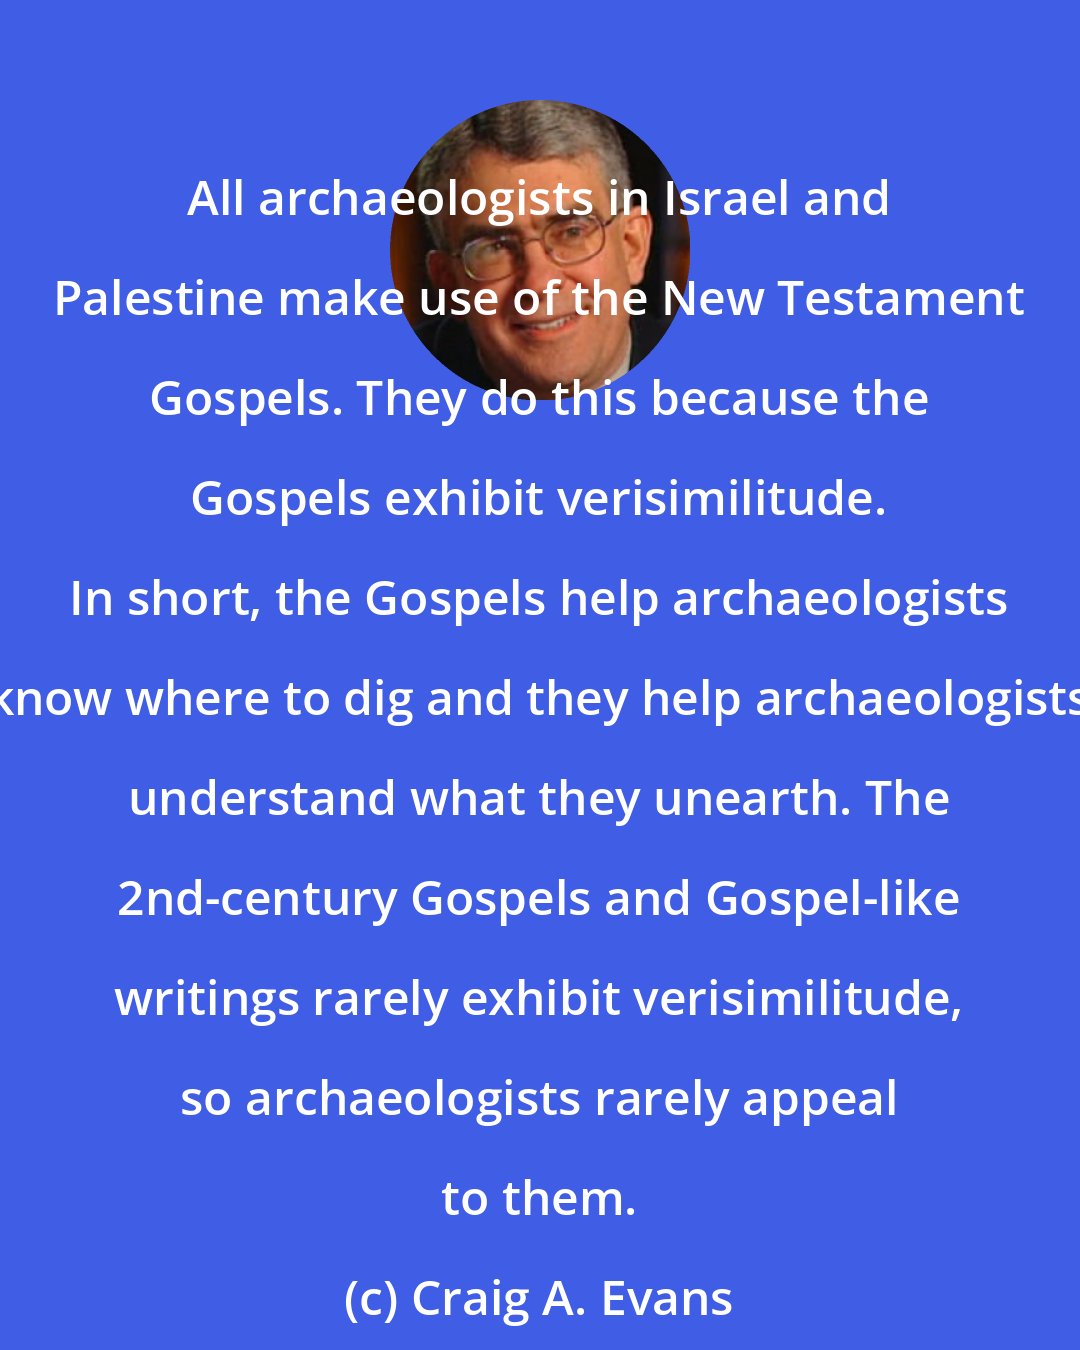 Craig A. Evans: All archaeologists in Israel and Palestine make use of the New Testament Gospels. They do this because the Gospels exhibit verisimilitude. In short, the Gospels help archaeologists know where to dig and they help archaeologists understand what they unearth. The 2nd-century Gospels and Gospel-like writings rarely exhibit verisimilitude, so archaeologists rarely appeal to them.